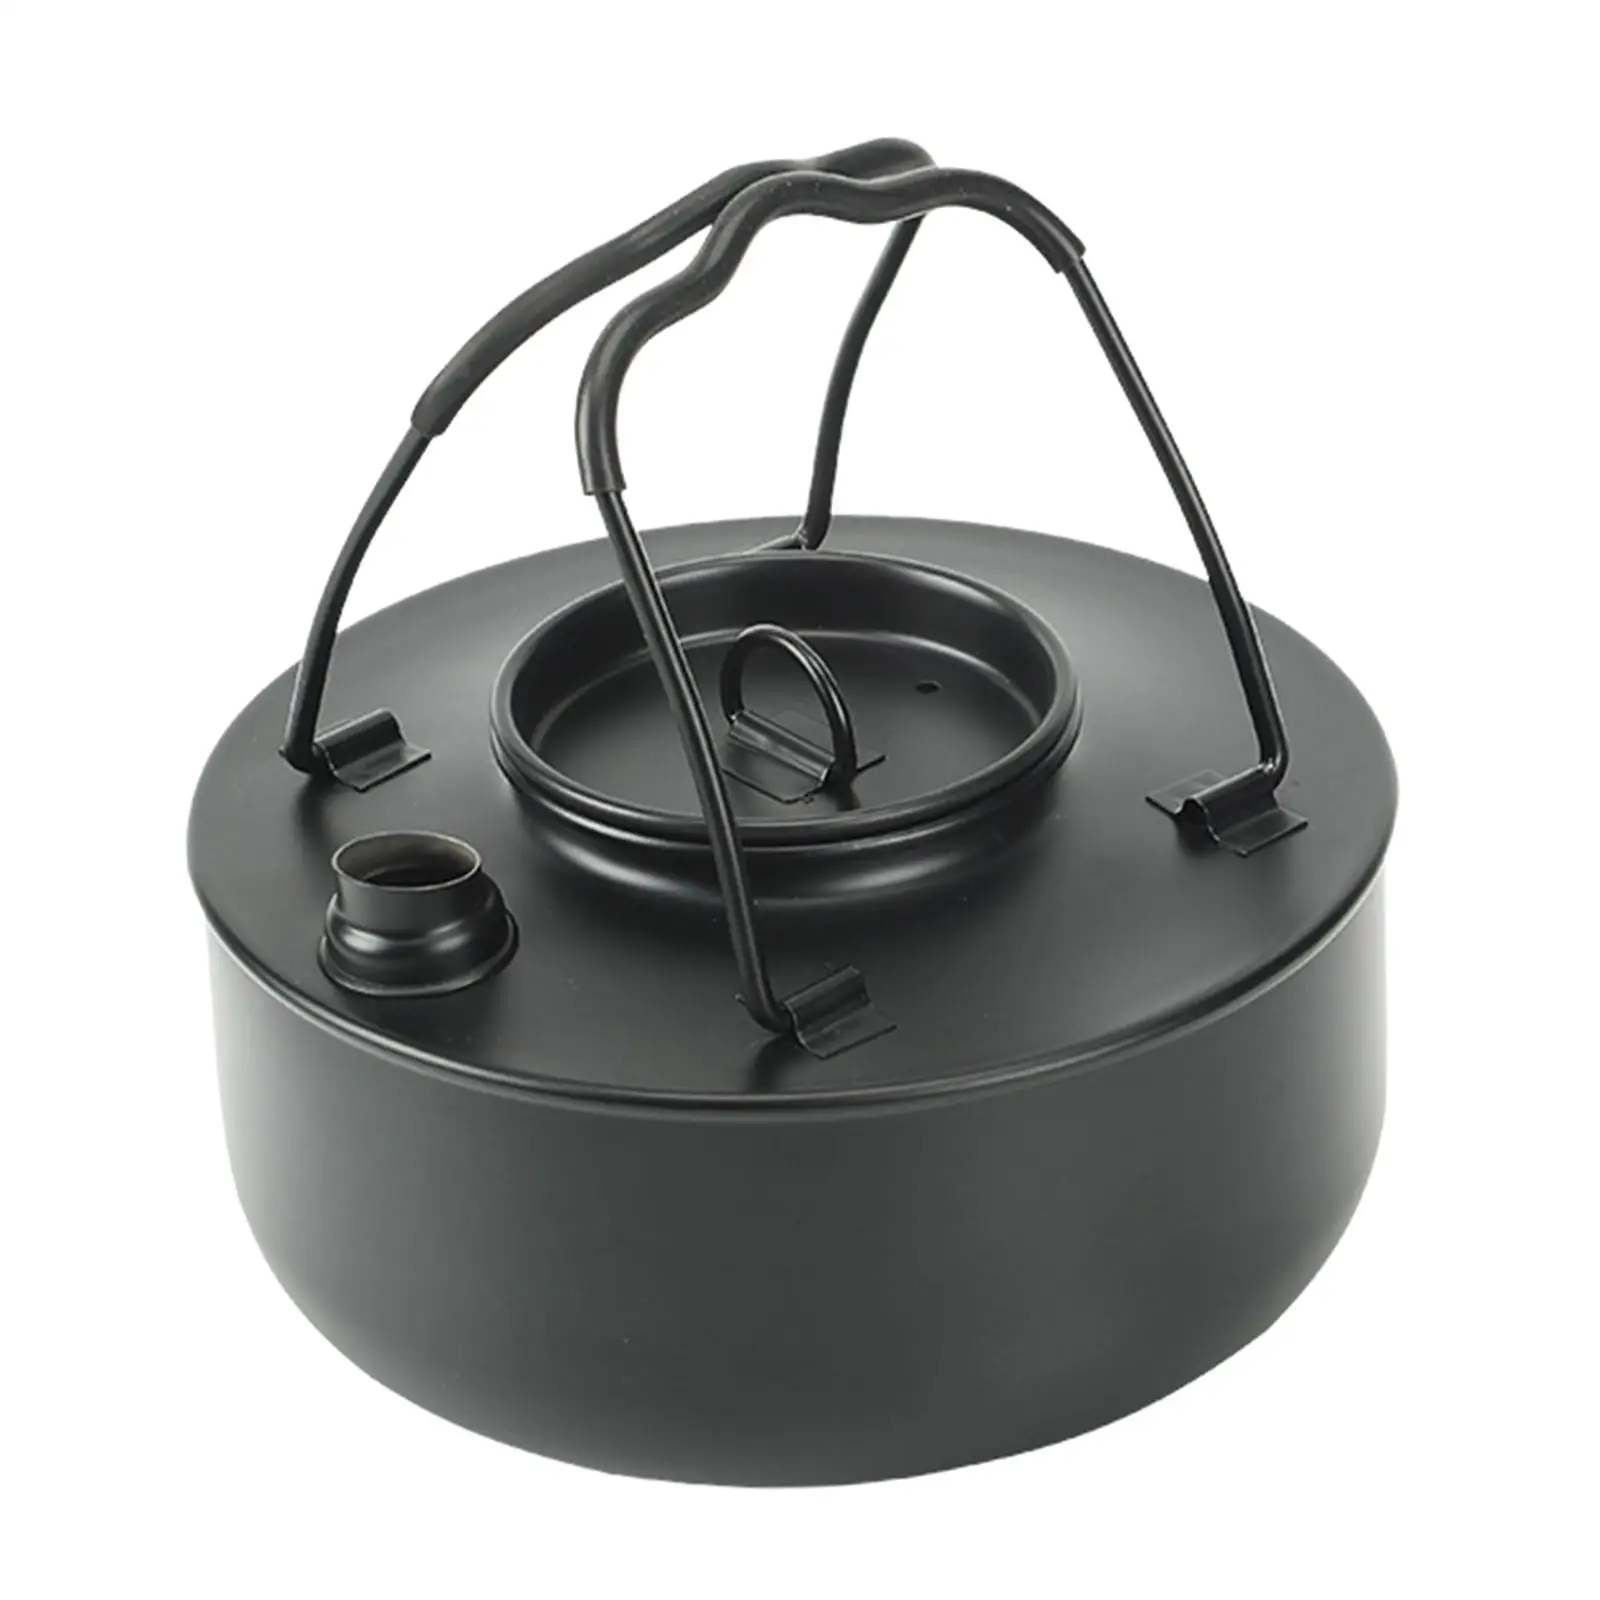 Portable Outdoor Stove Pot Teapot Kitchenware Backpack Fishing Anti Scald Handle Camping Kettle for Tea Coffee Open Fire Travel